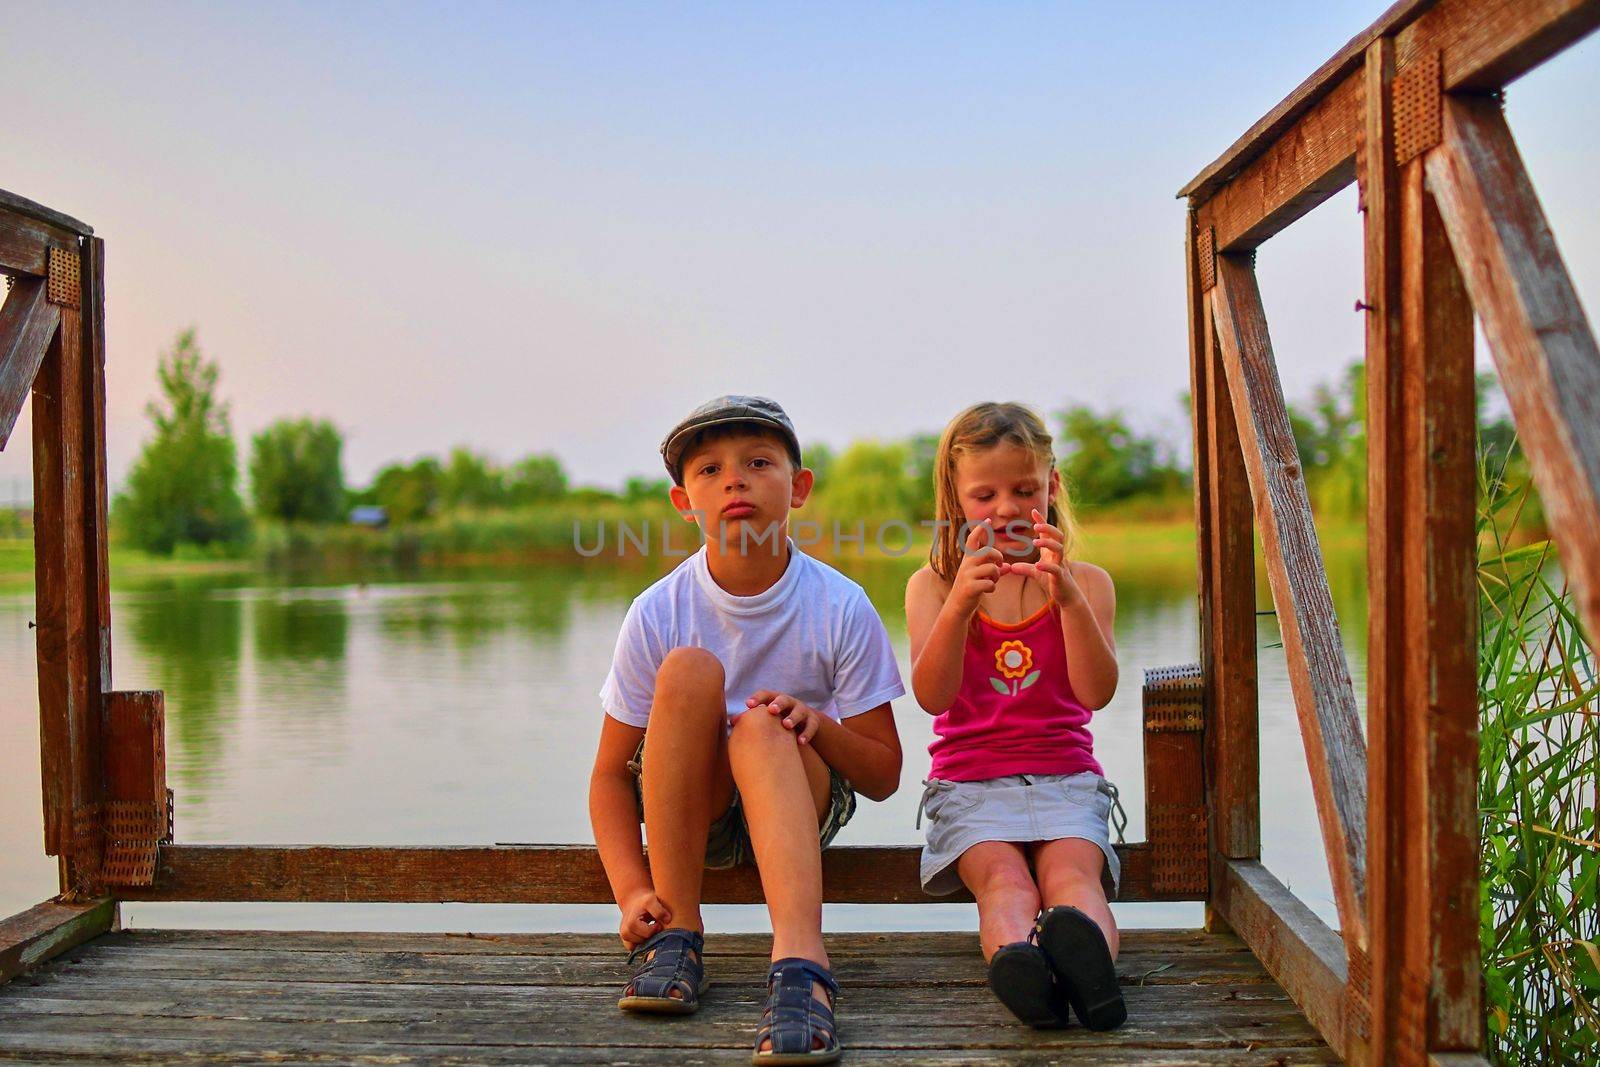 Children sitting on pier. Two children of different age - elementary age boy and preschool girl sitting on a wooden pier. Summer and childhood concept. Children on bench at the lake.